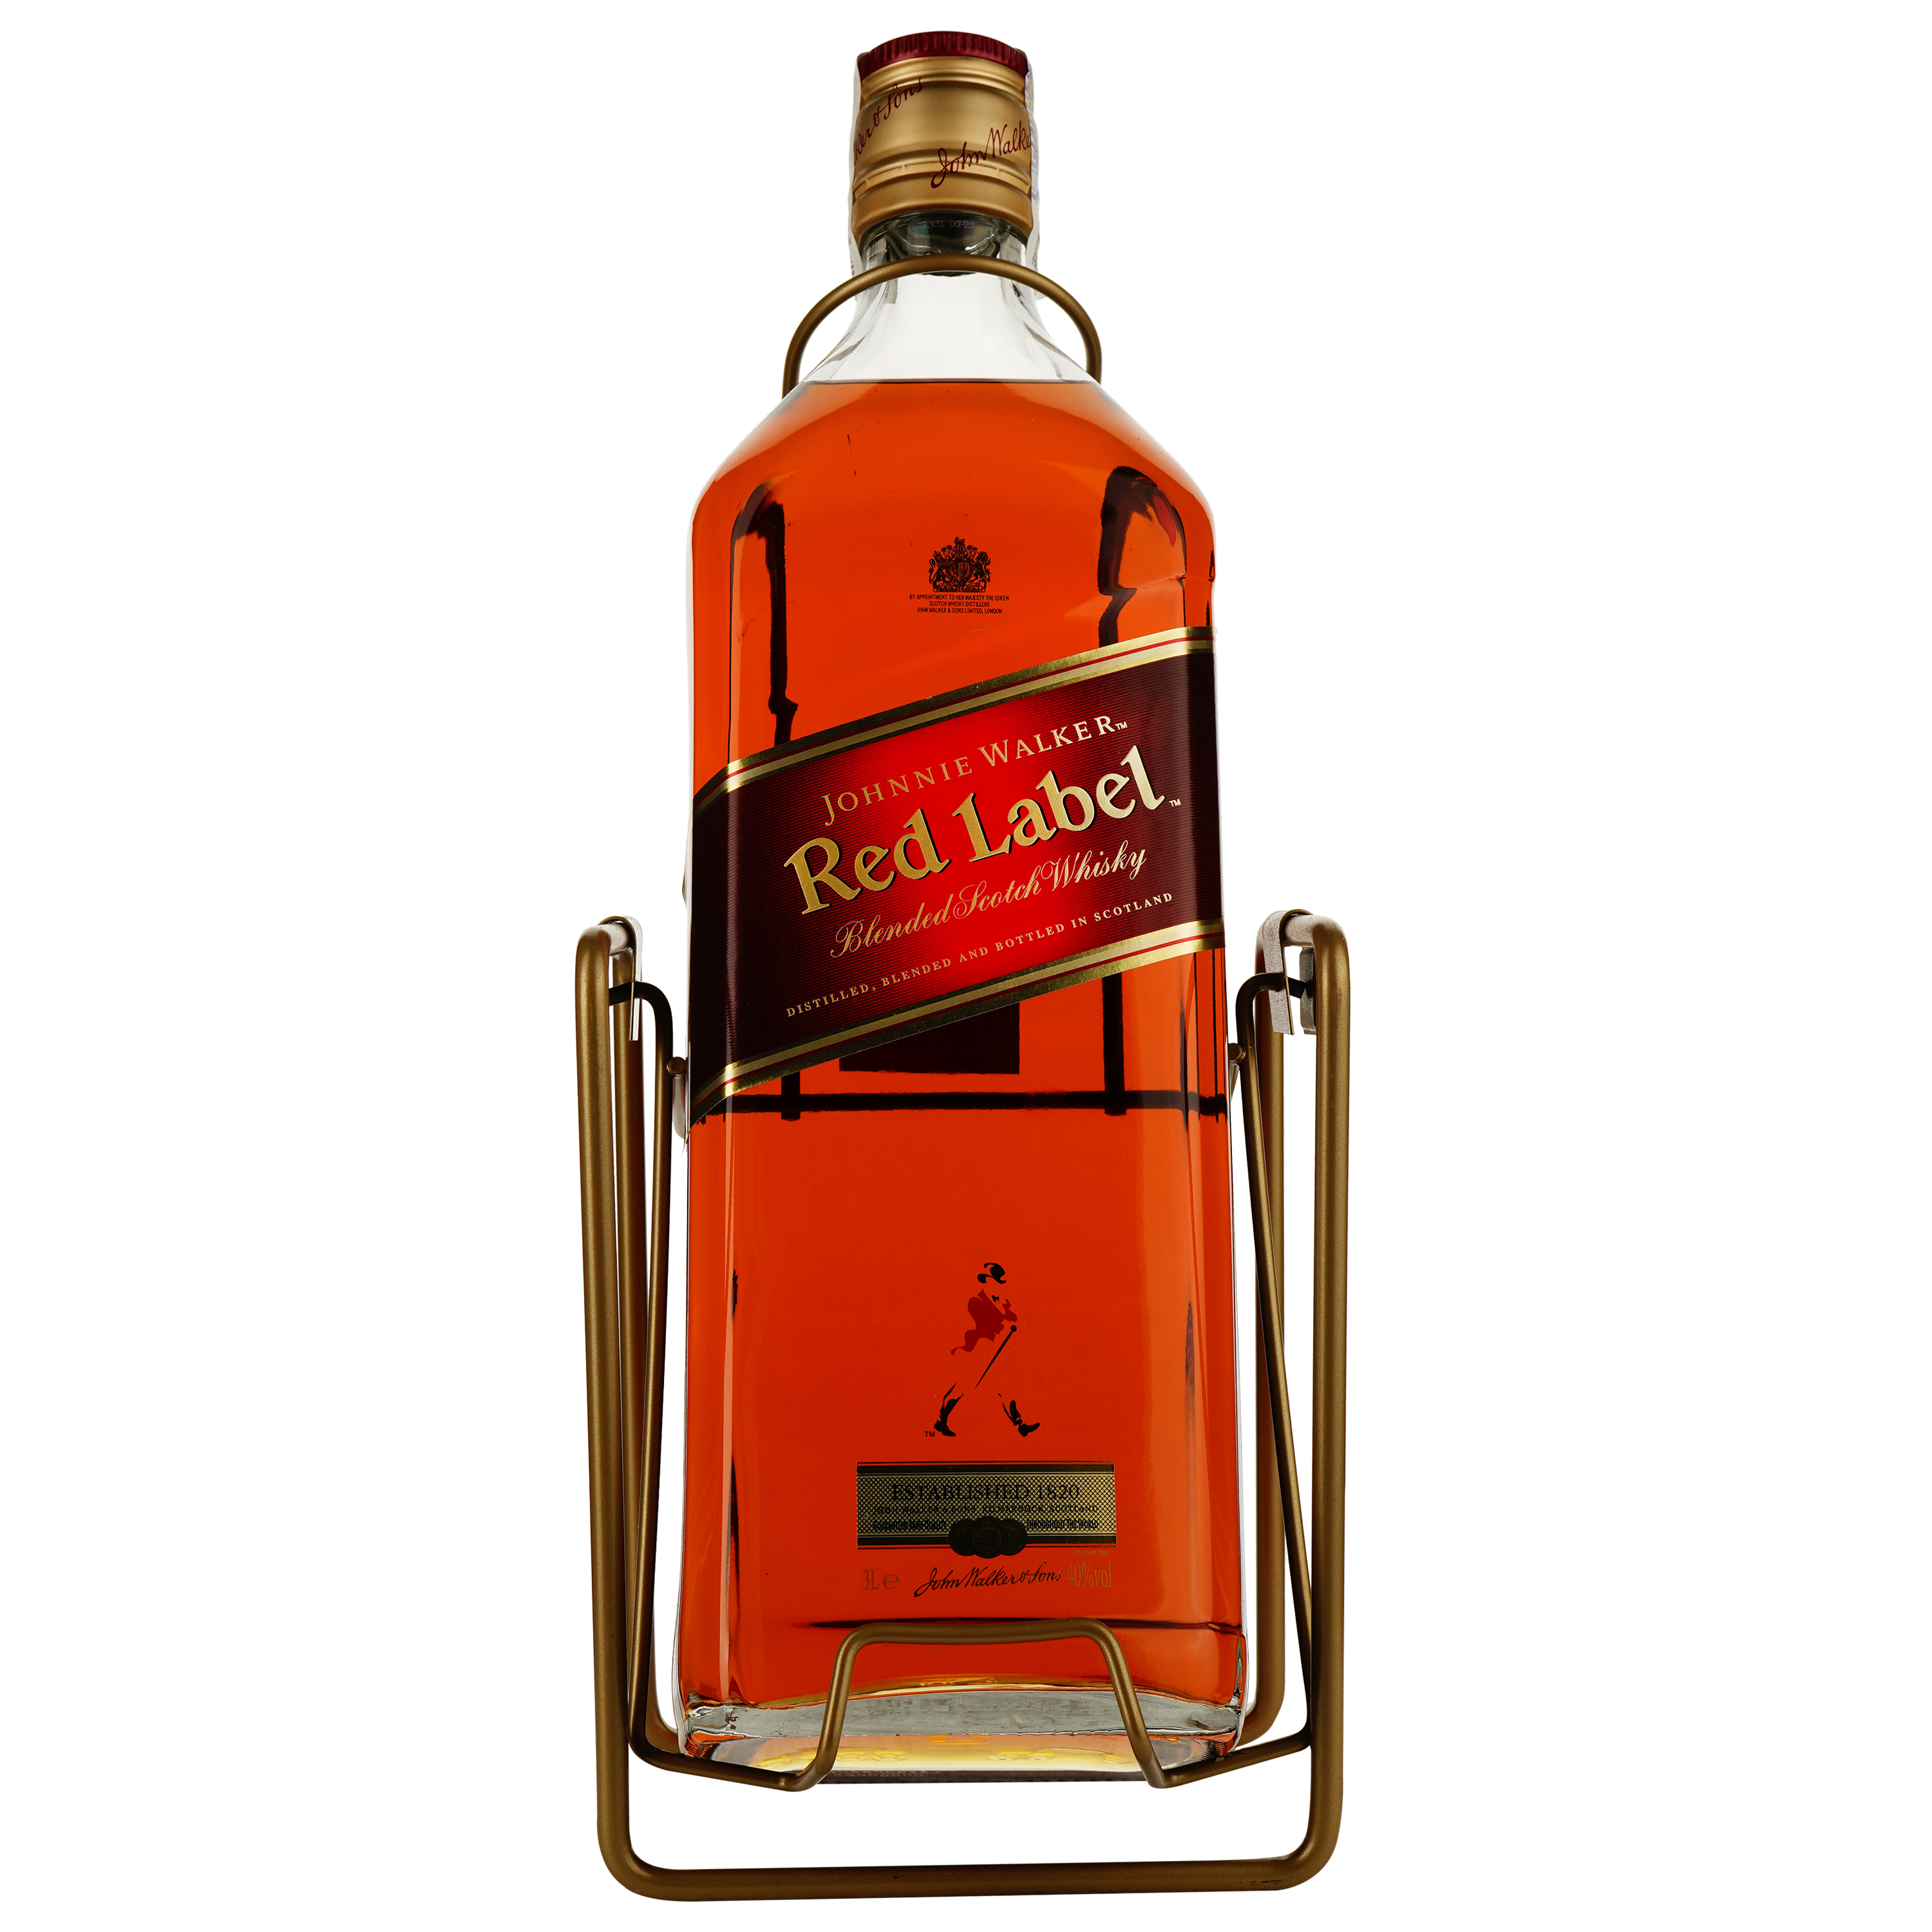 Виски Johnnie Walker Red label Blended Scotch Whisky, 3 л, 40% (676594) - фото 2